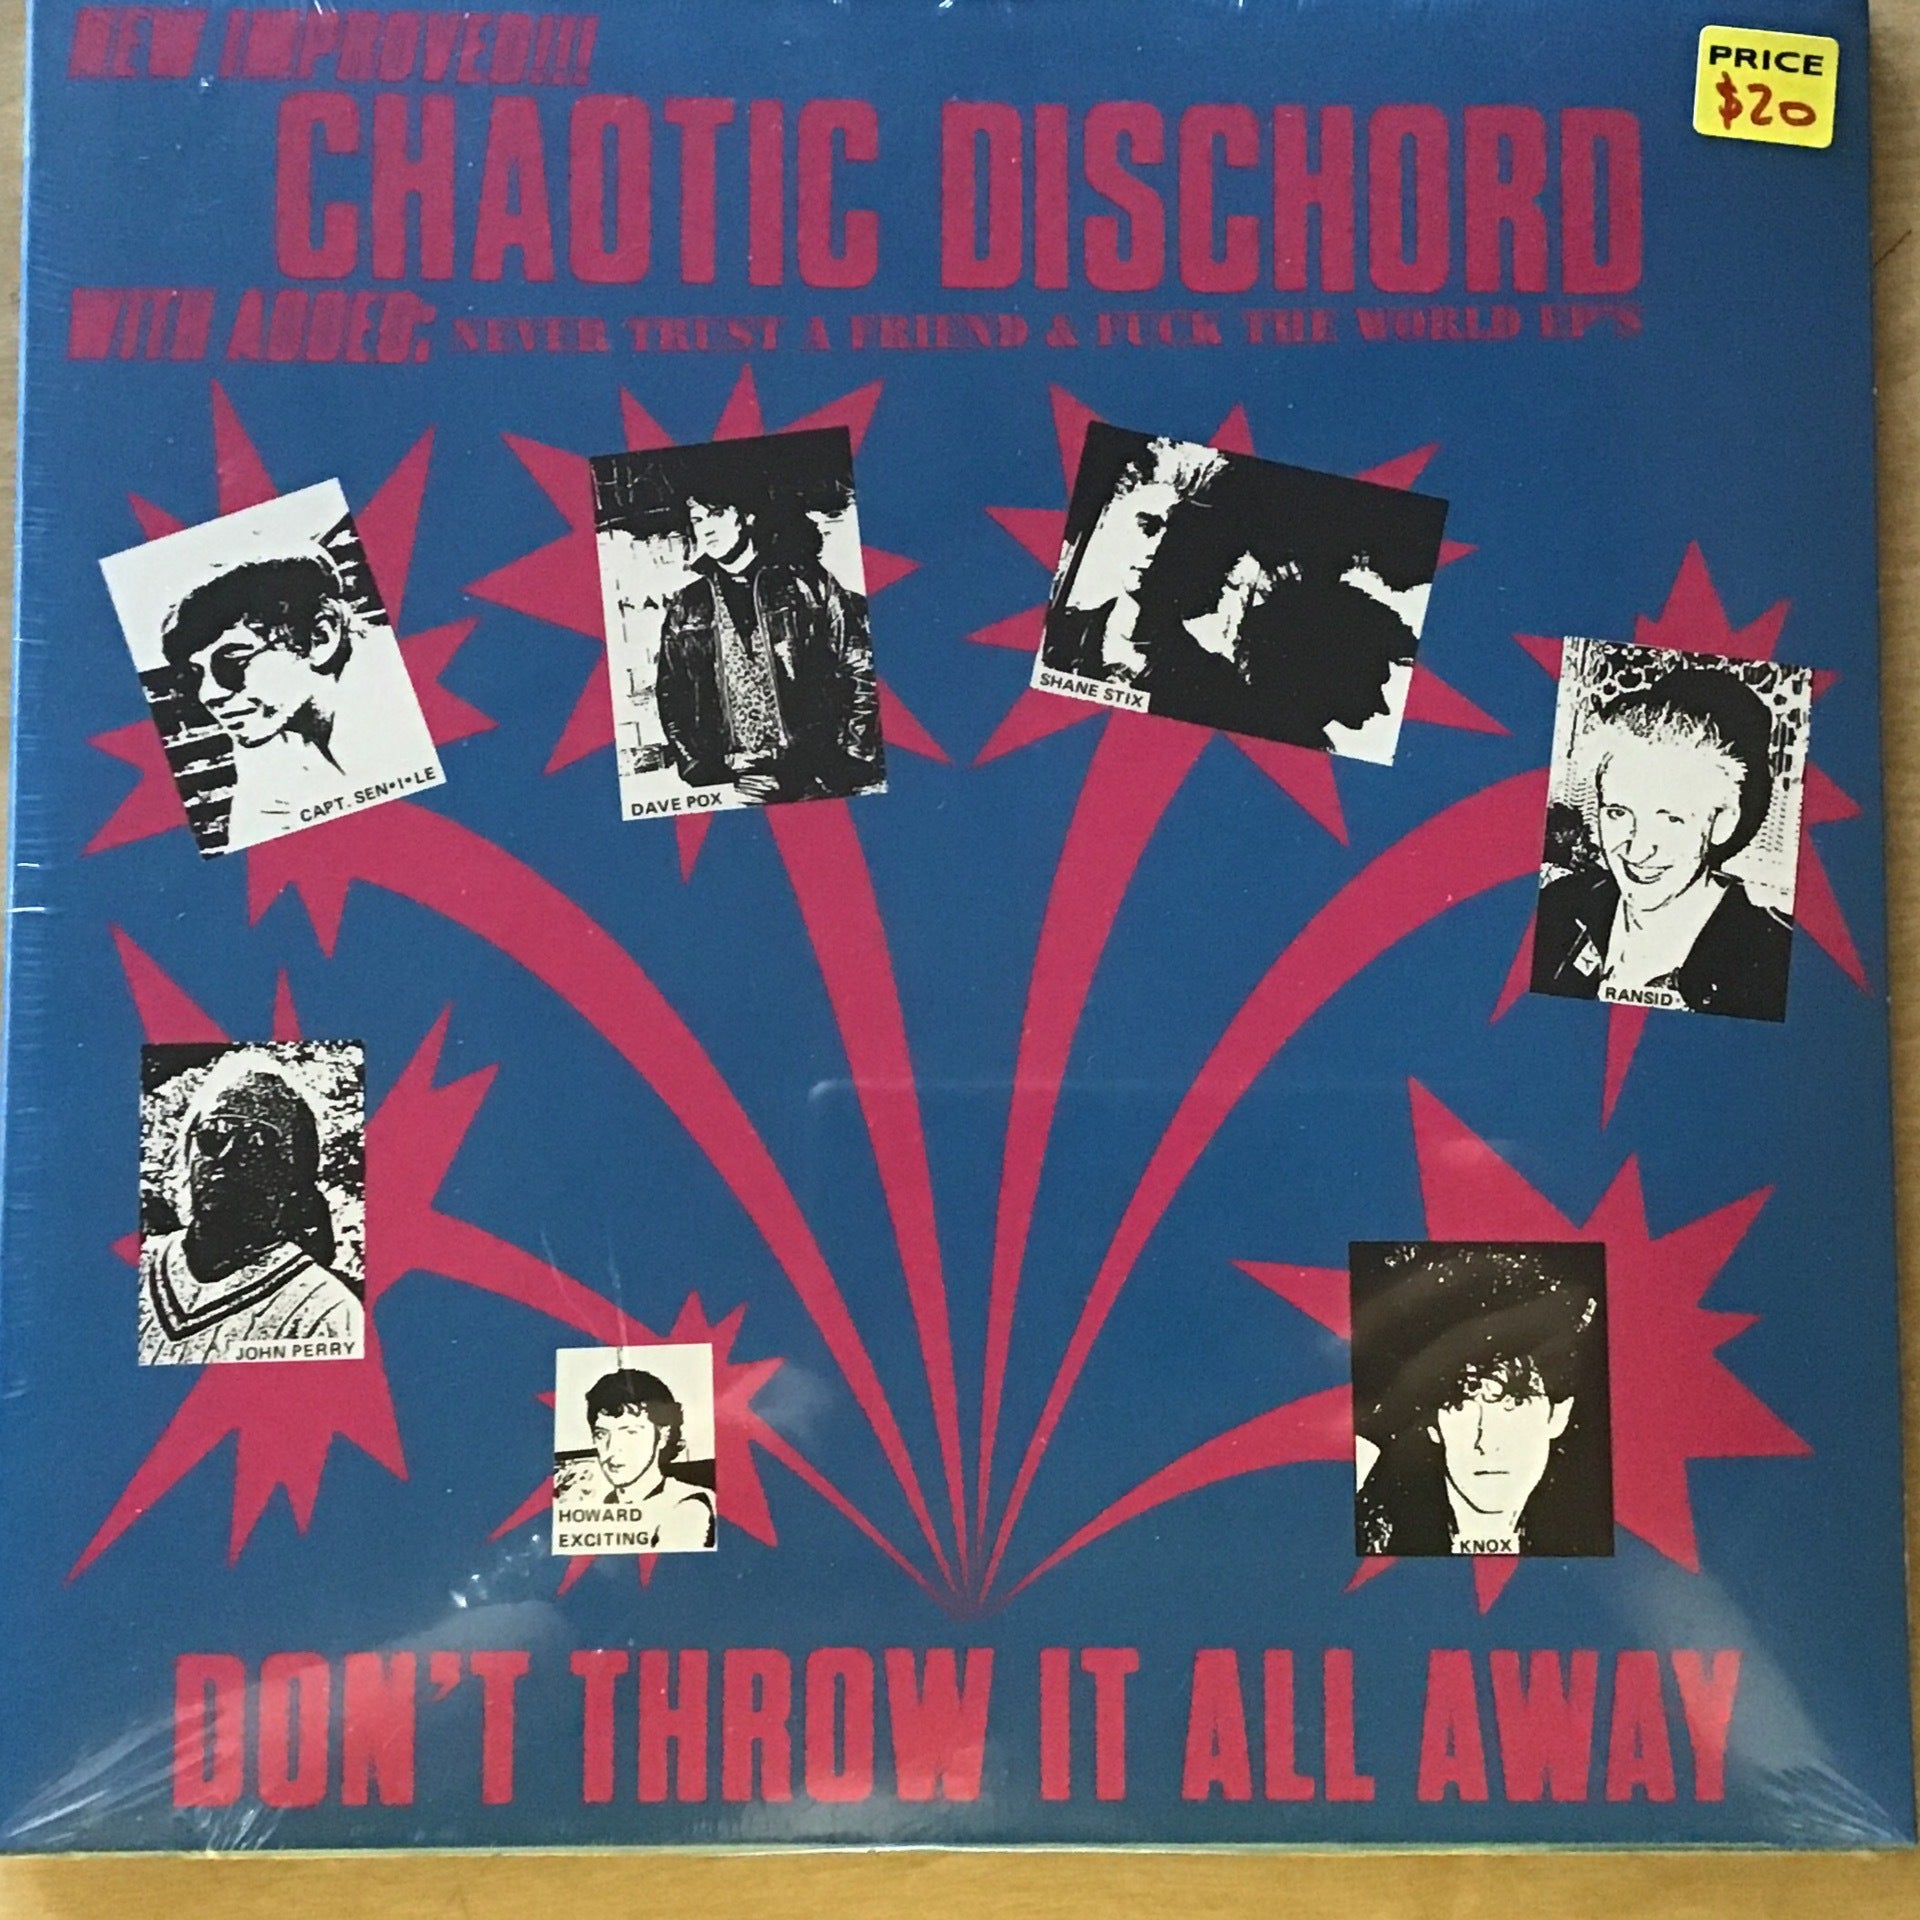 Chaotic Dischord - Don’t Throw It All Away - 12”